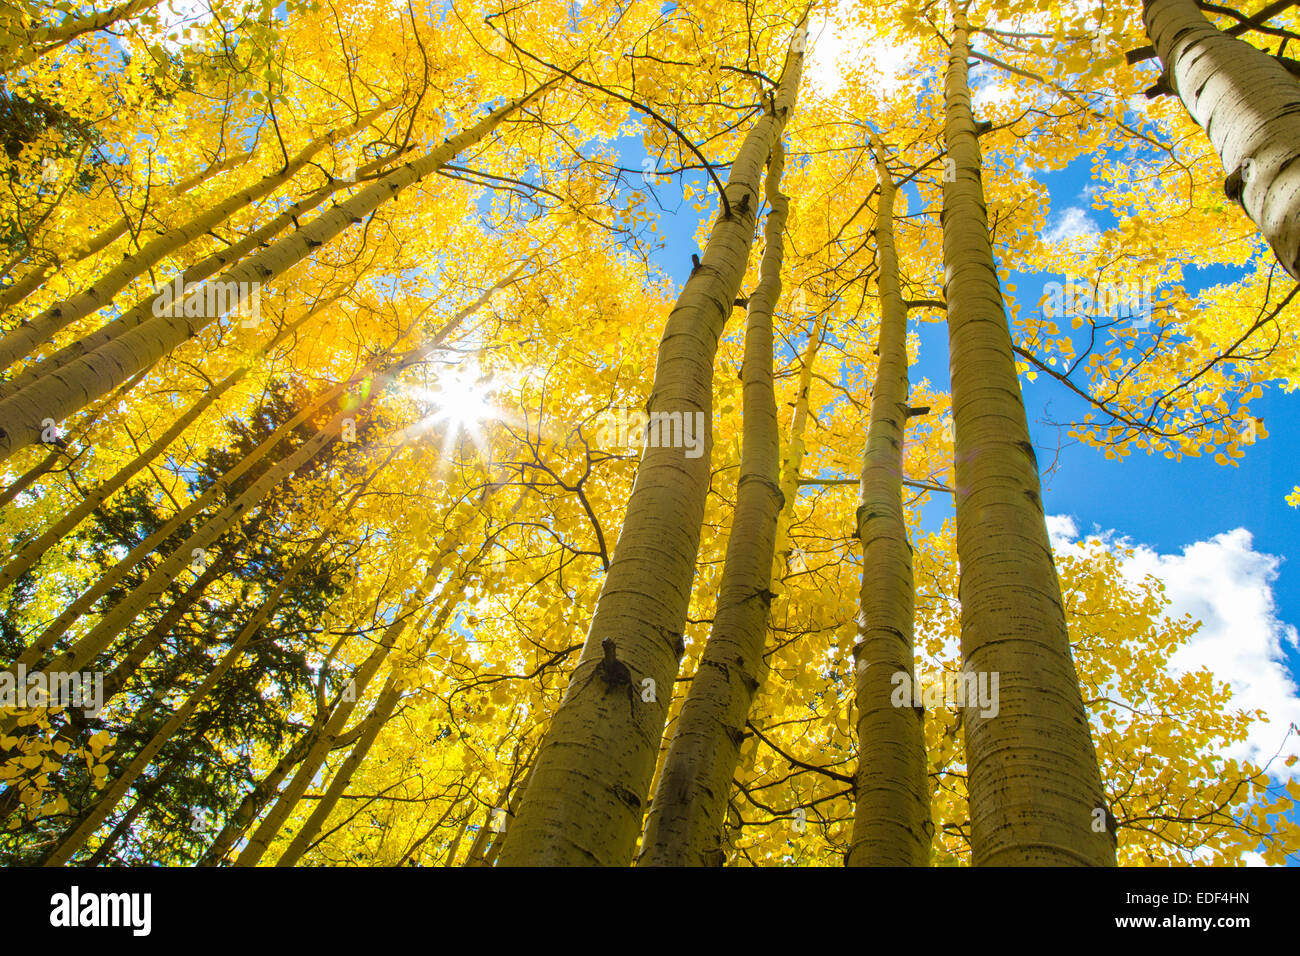 Looking up into bright yellow Aspen trees with blue sky on a fall day in Colorado Stock Photo